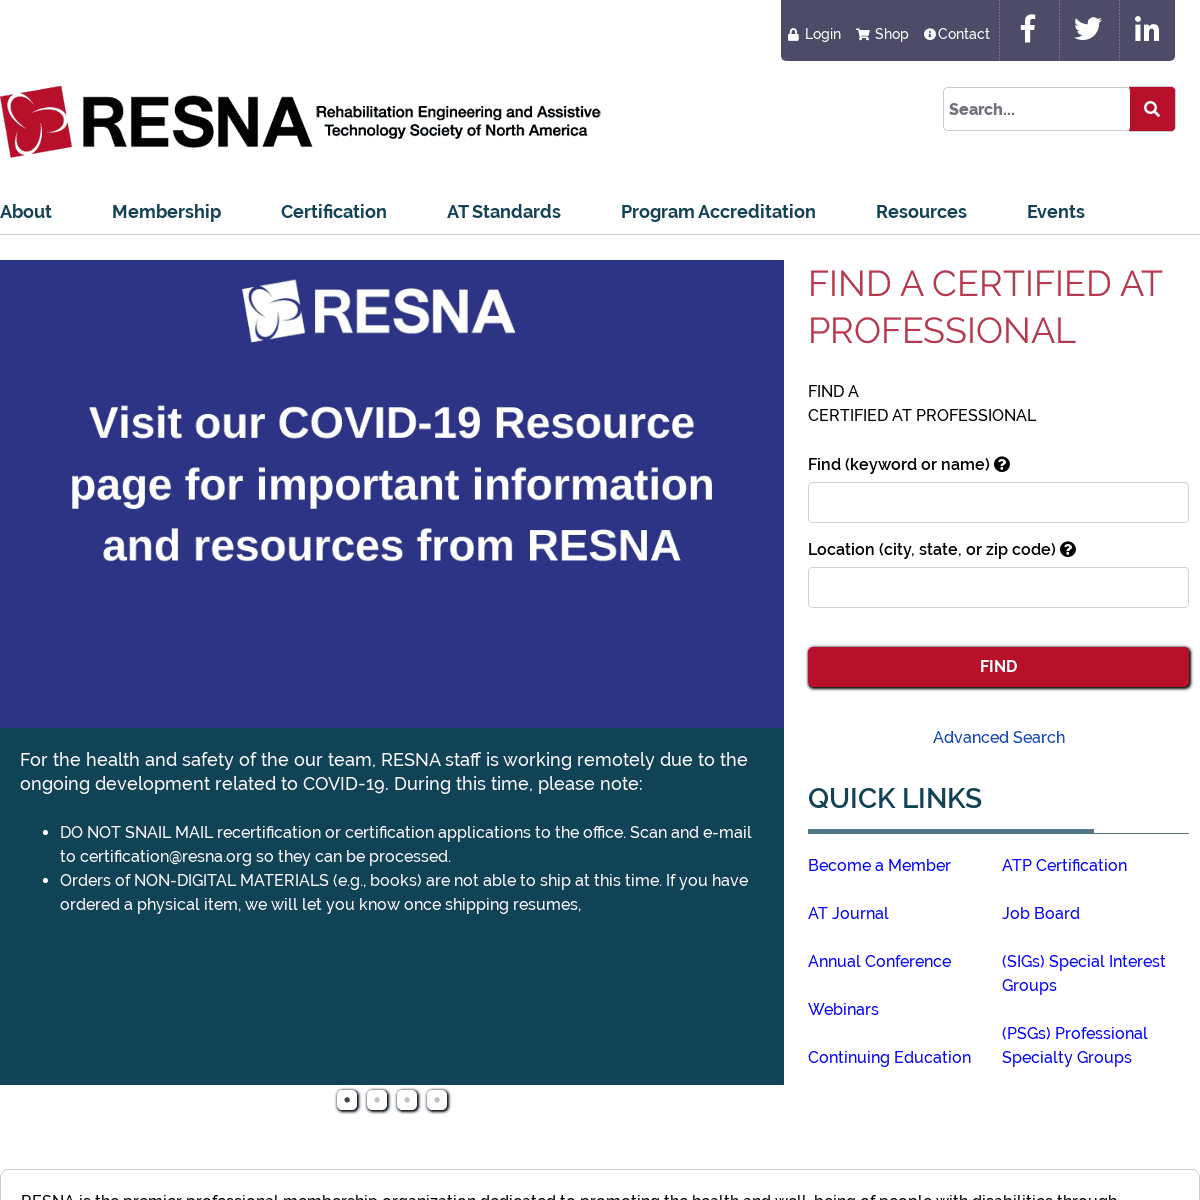 A complete backup of resna.org